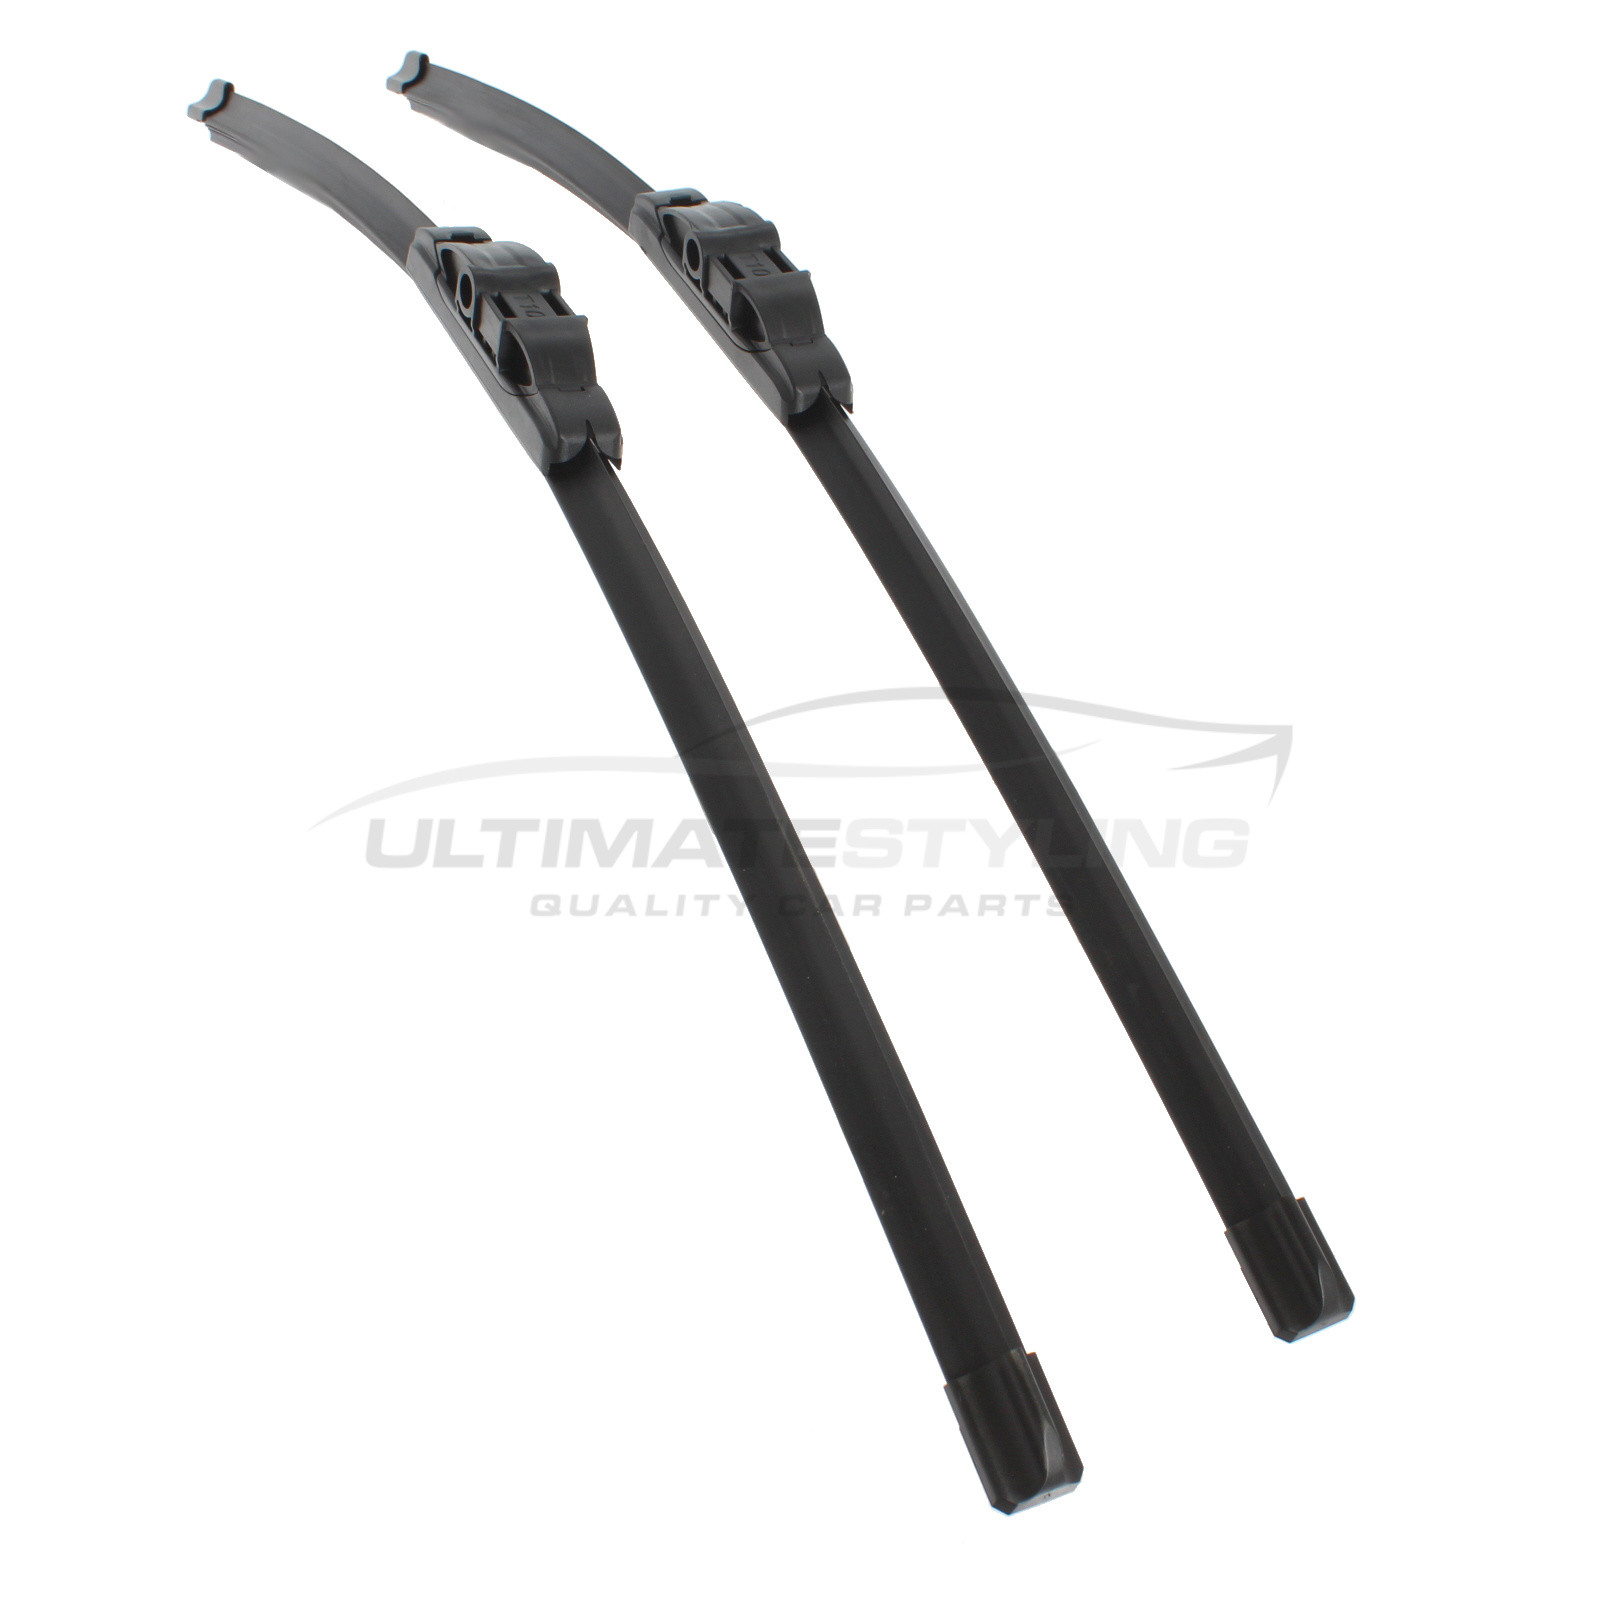 Drivers Side & Passenger Side (Front) Wiper Blades for Mercedes Benz C Class